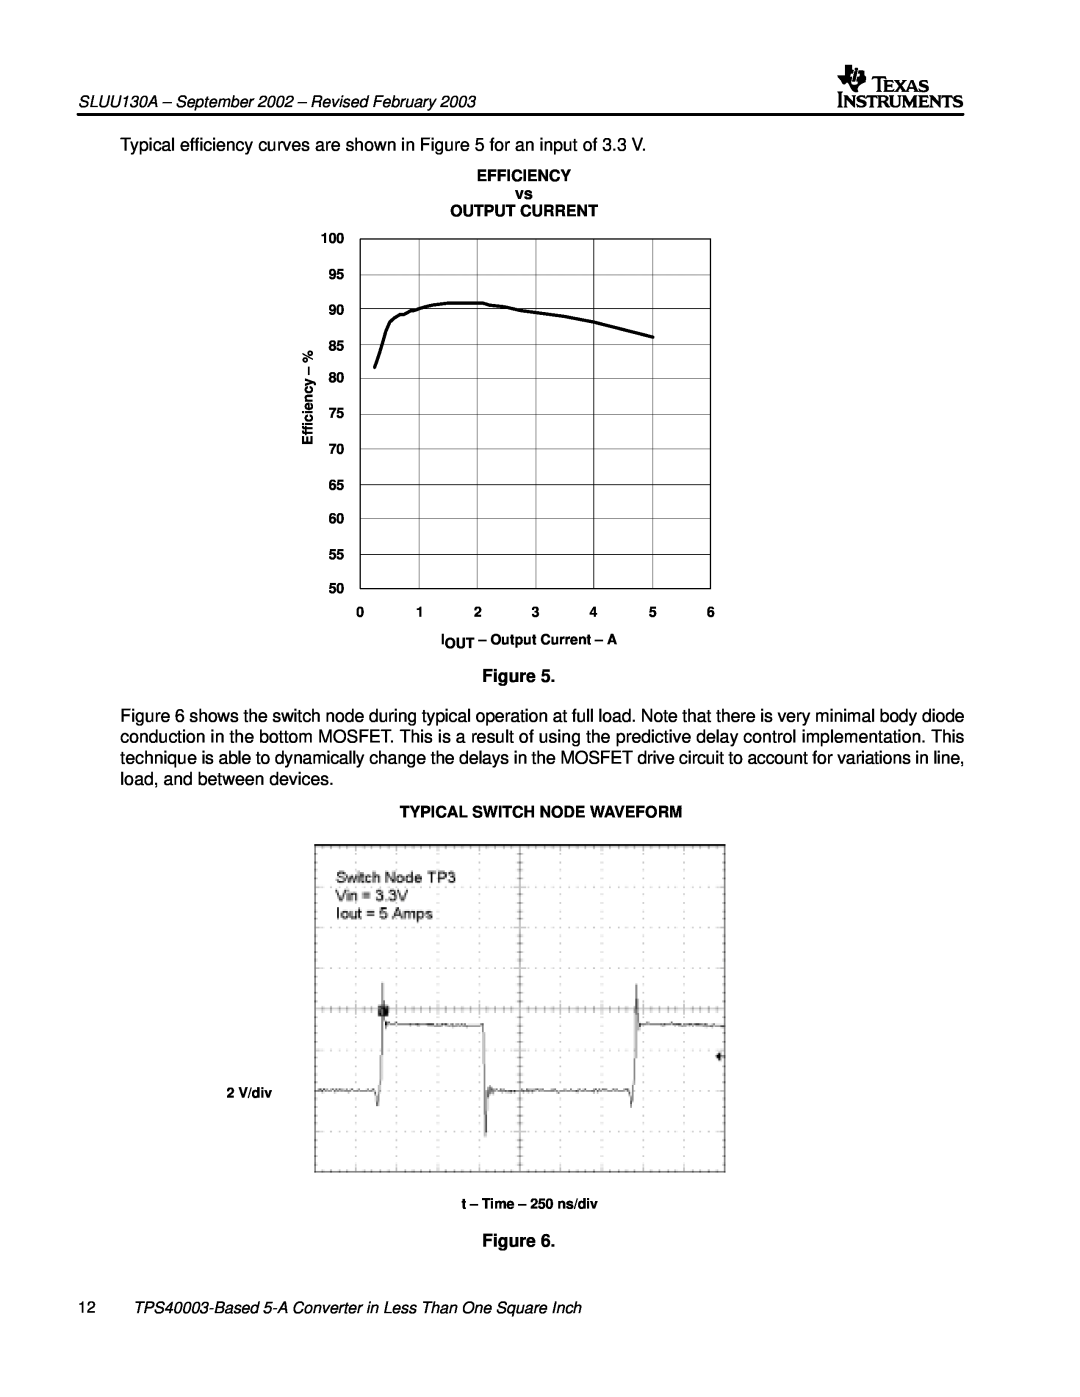 Texas Instruments TPS40003 manual Typical efficiency curves are shown in for an input of 3.3 